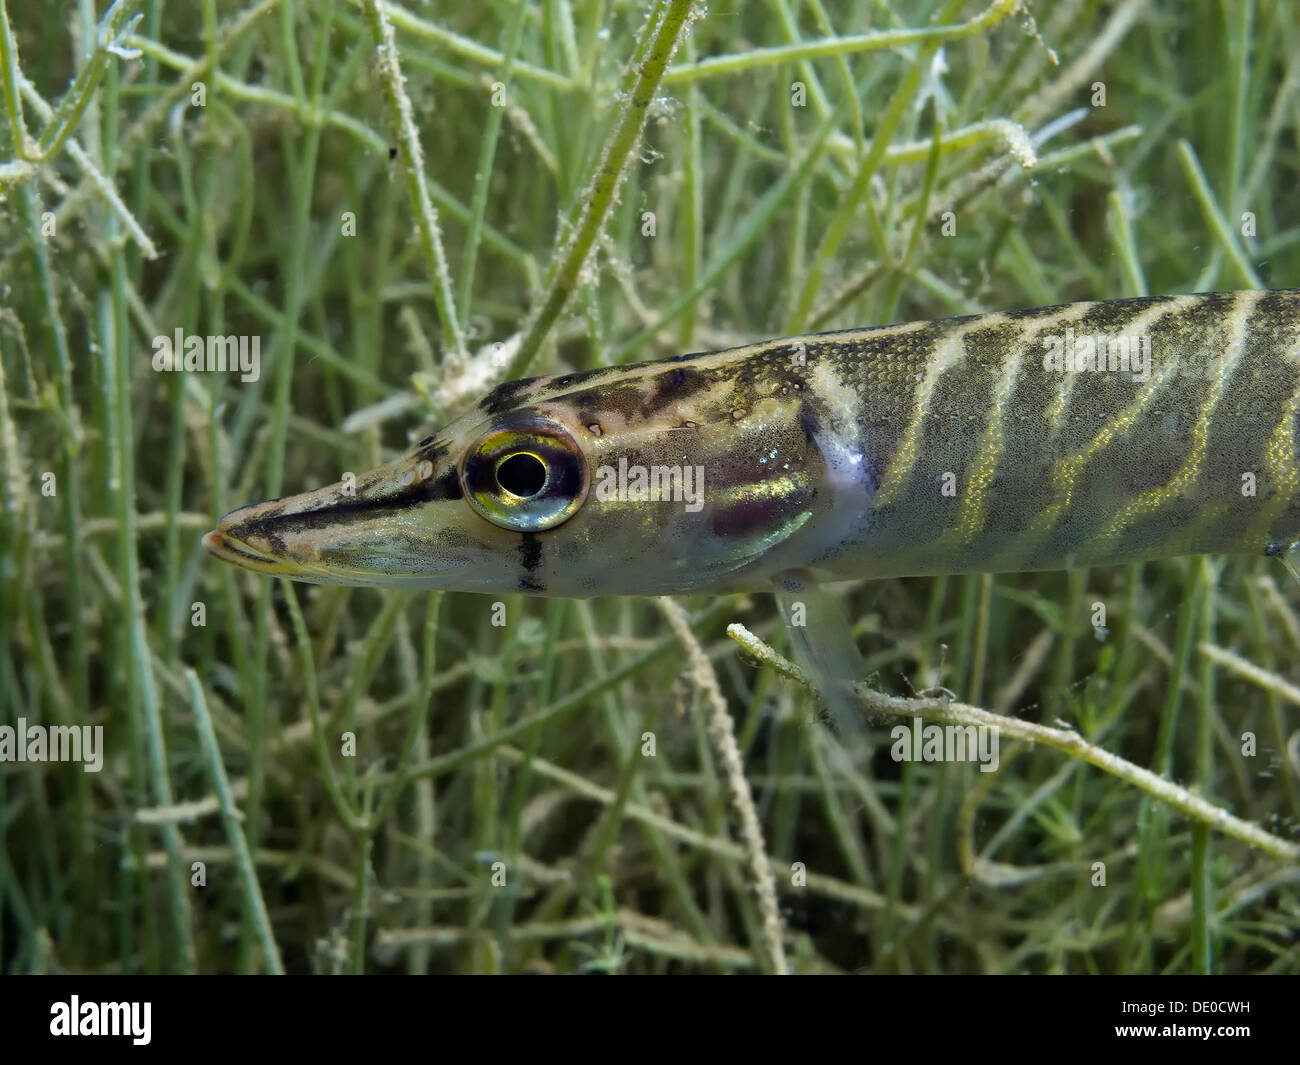 Northern pike (Esox lucius), juvenile, size about 14 cm, on the prowl in Helenesee lake, near Frankfurt Oder, Brandenburg Stock Photo